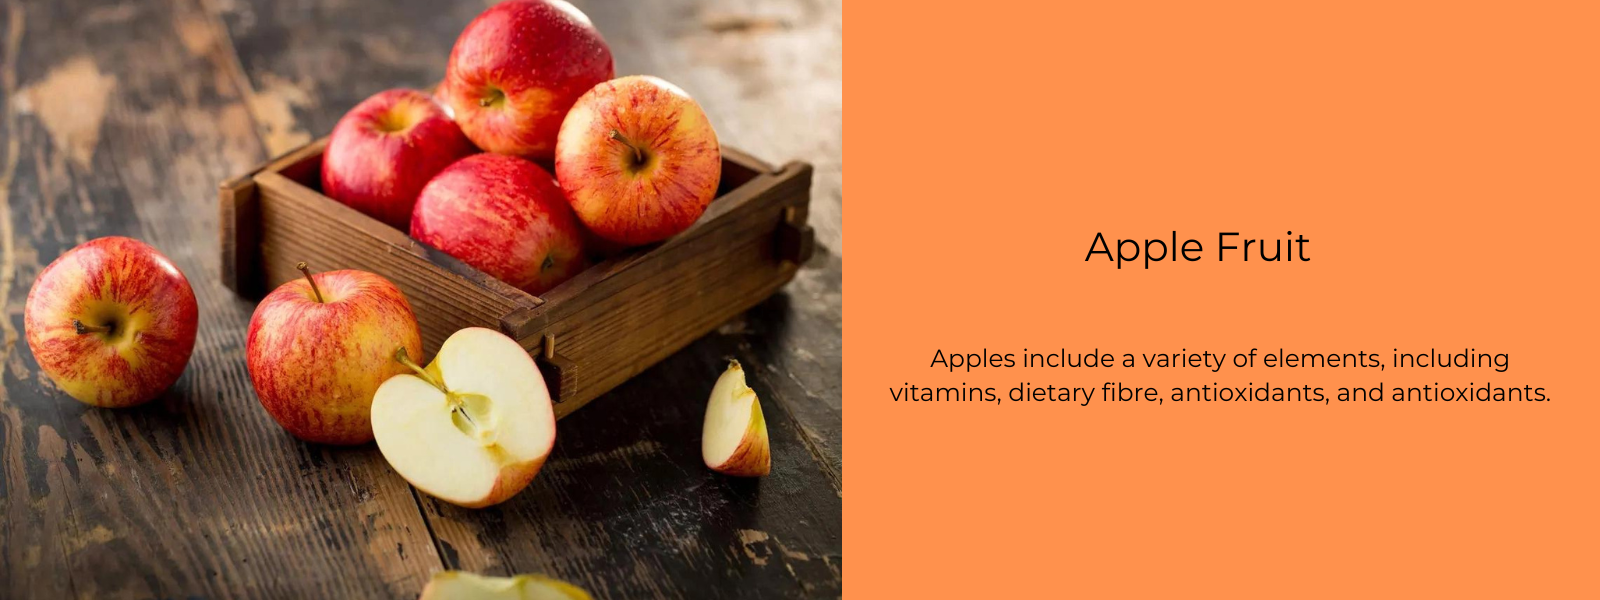 Apple Fruit - Health Benefits, Uses and Important Facts